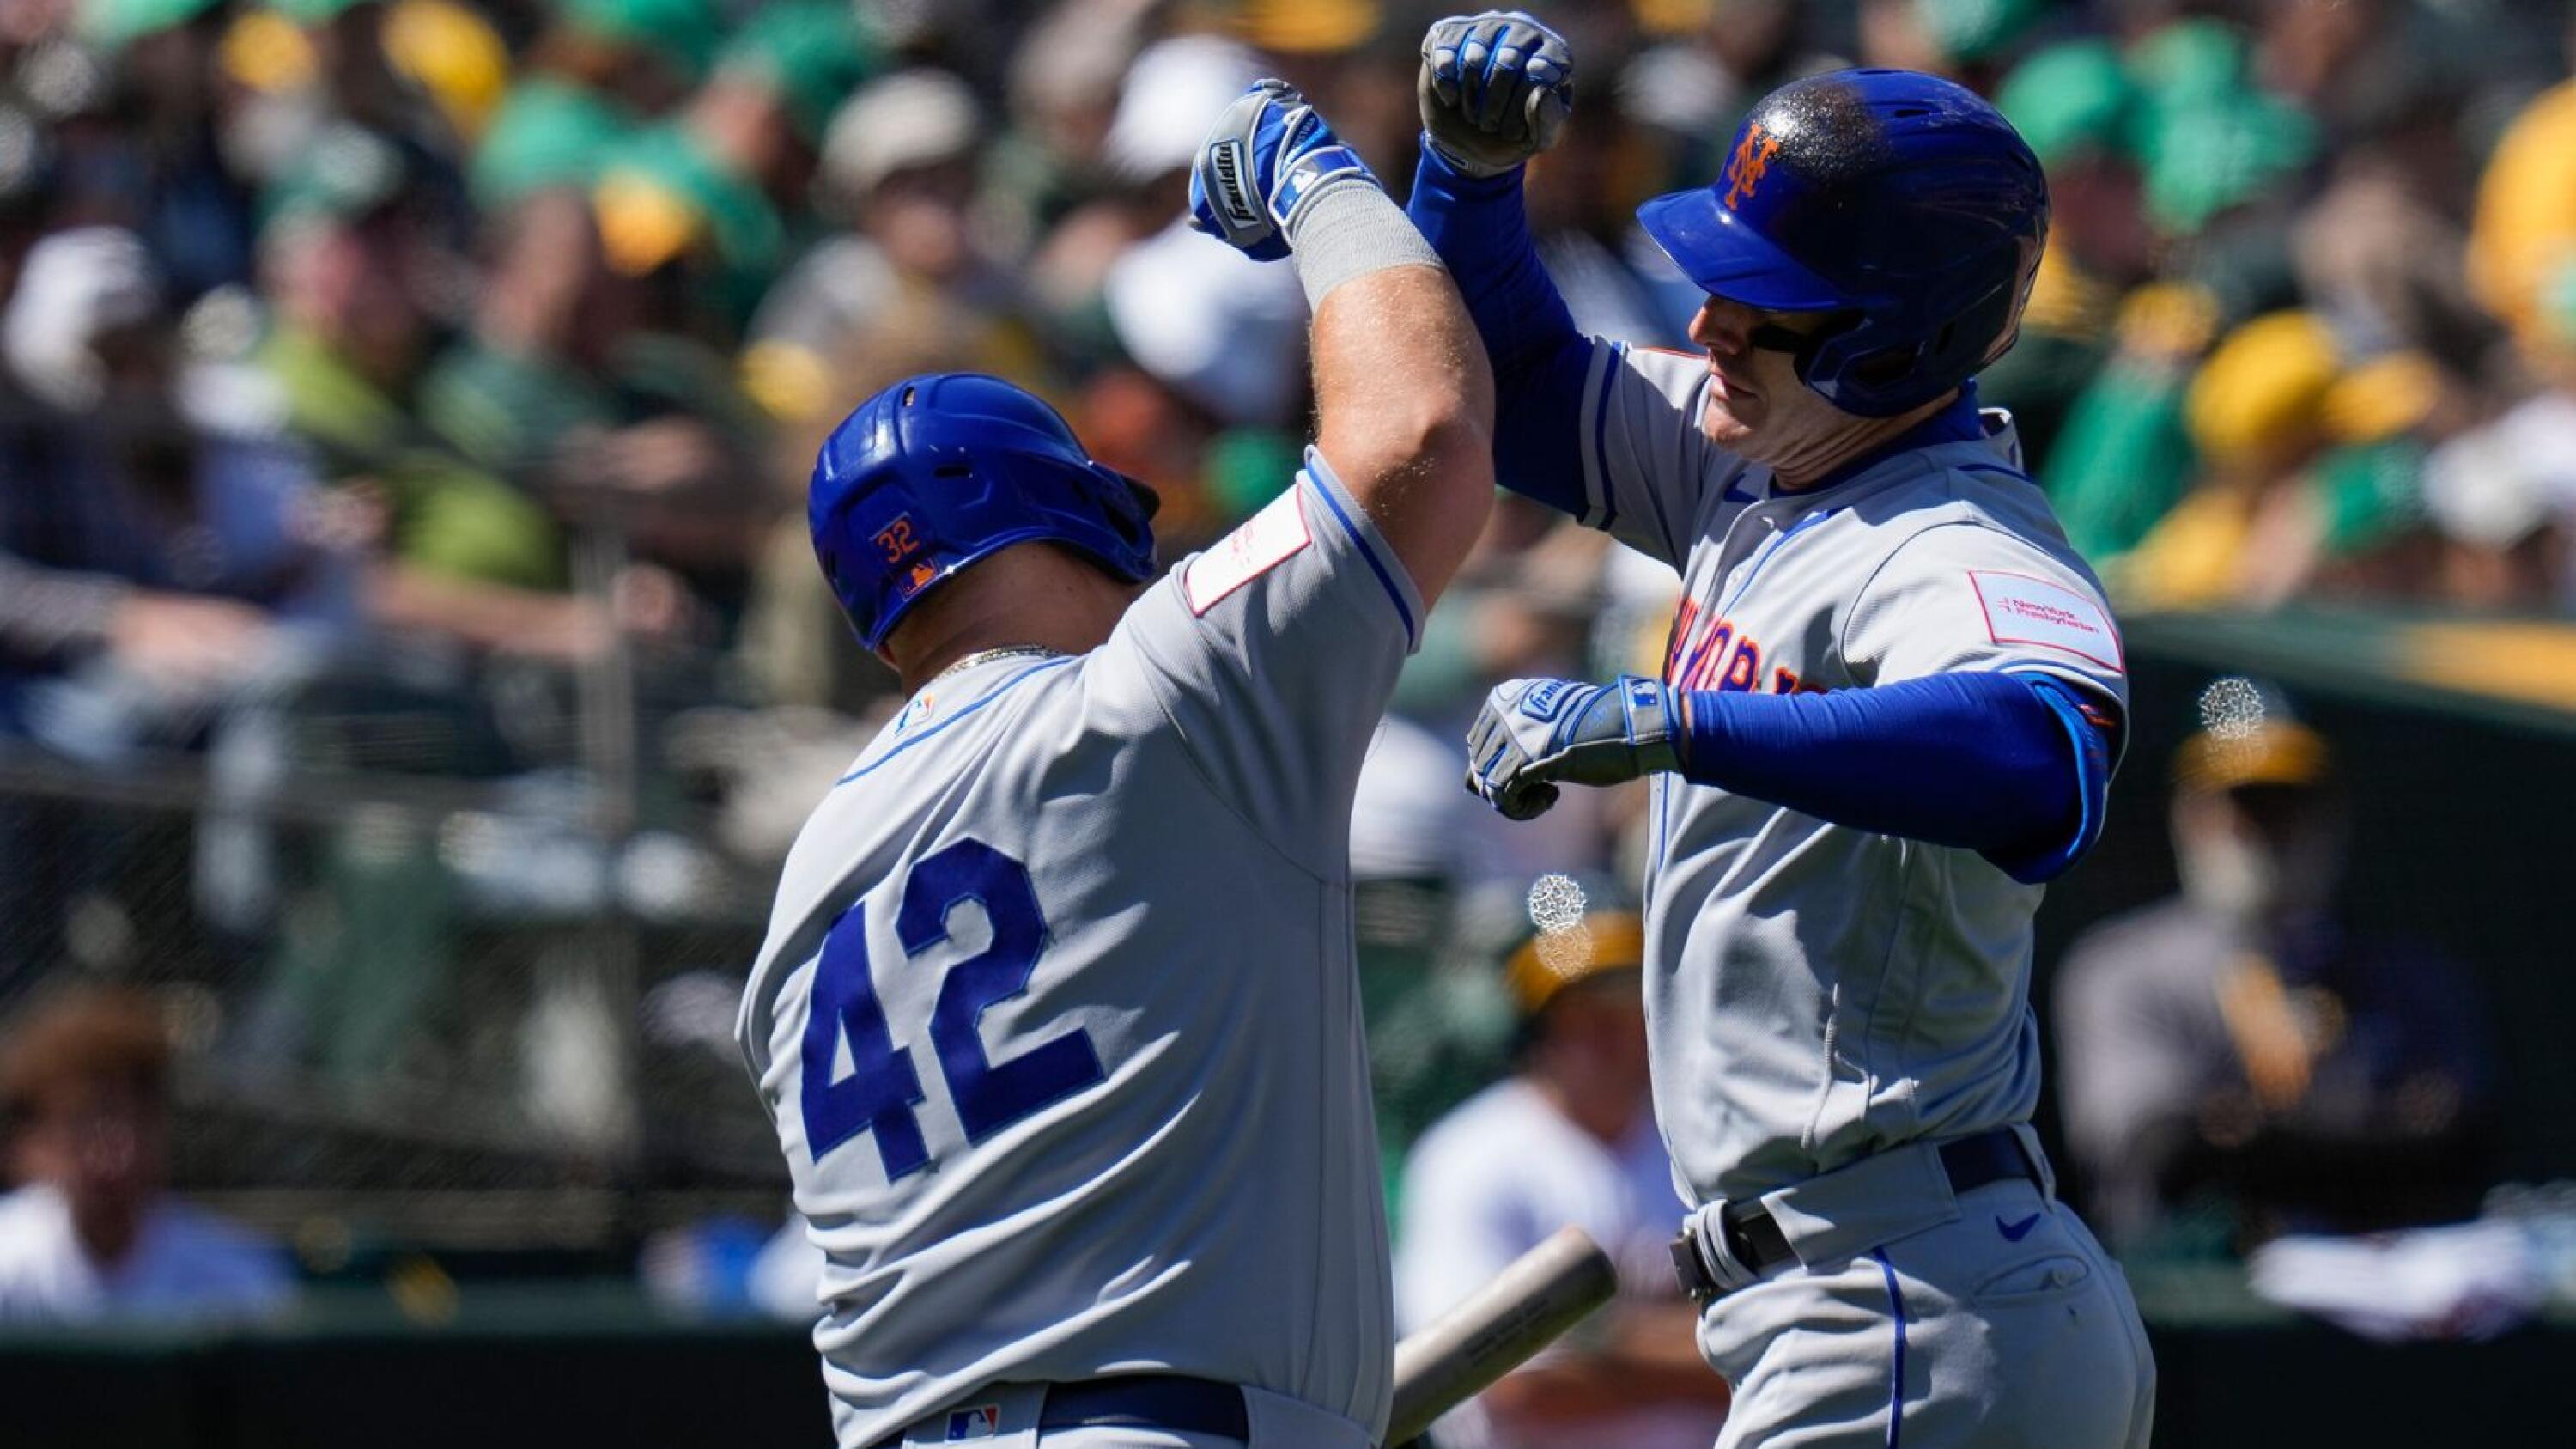 Canha HR, Nimmo RBI double spark Mets past Athletics 3-2